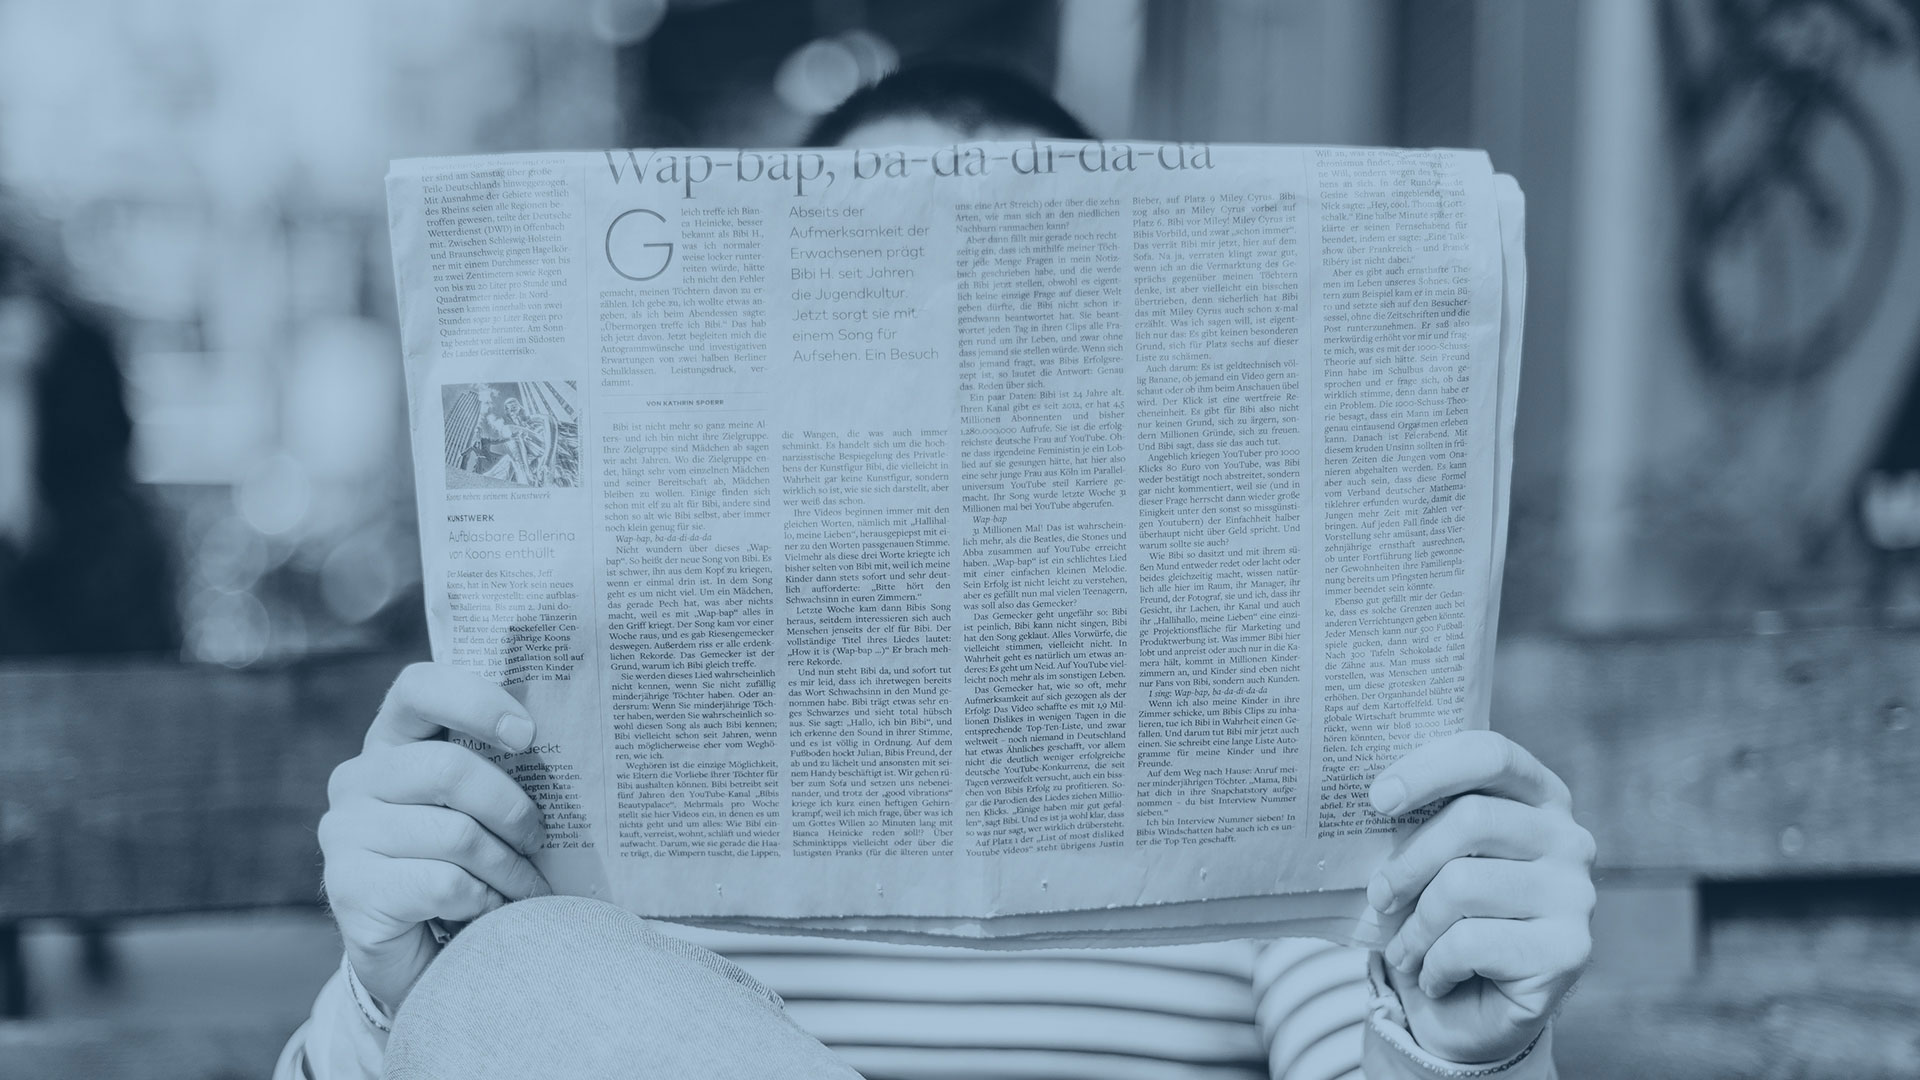 man's face obscured by newspaper